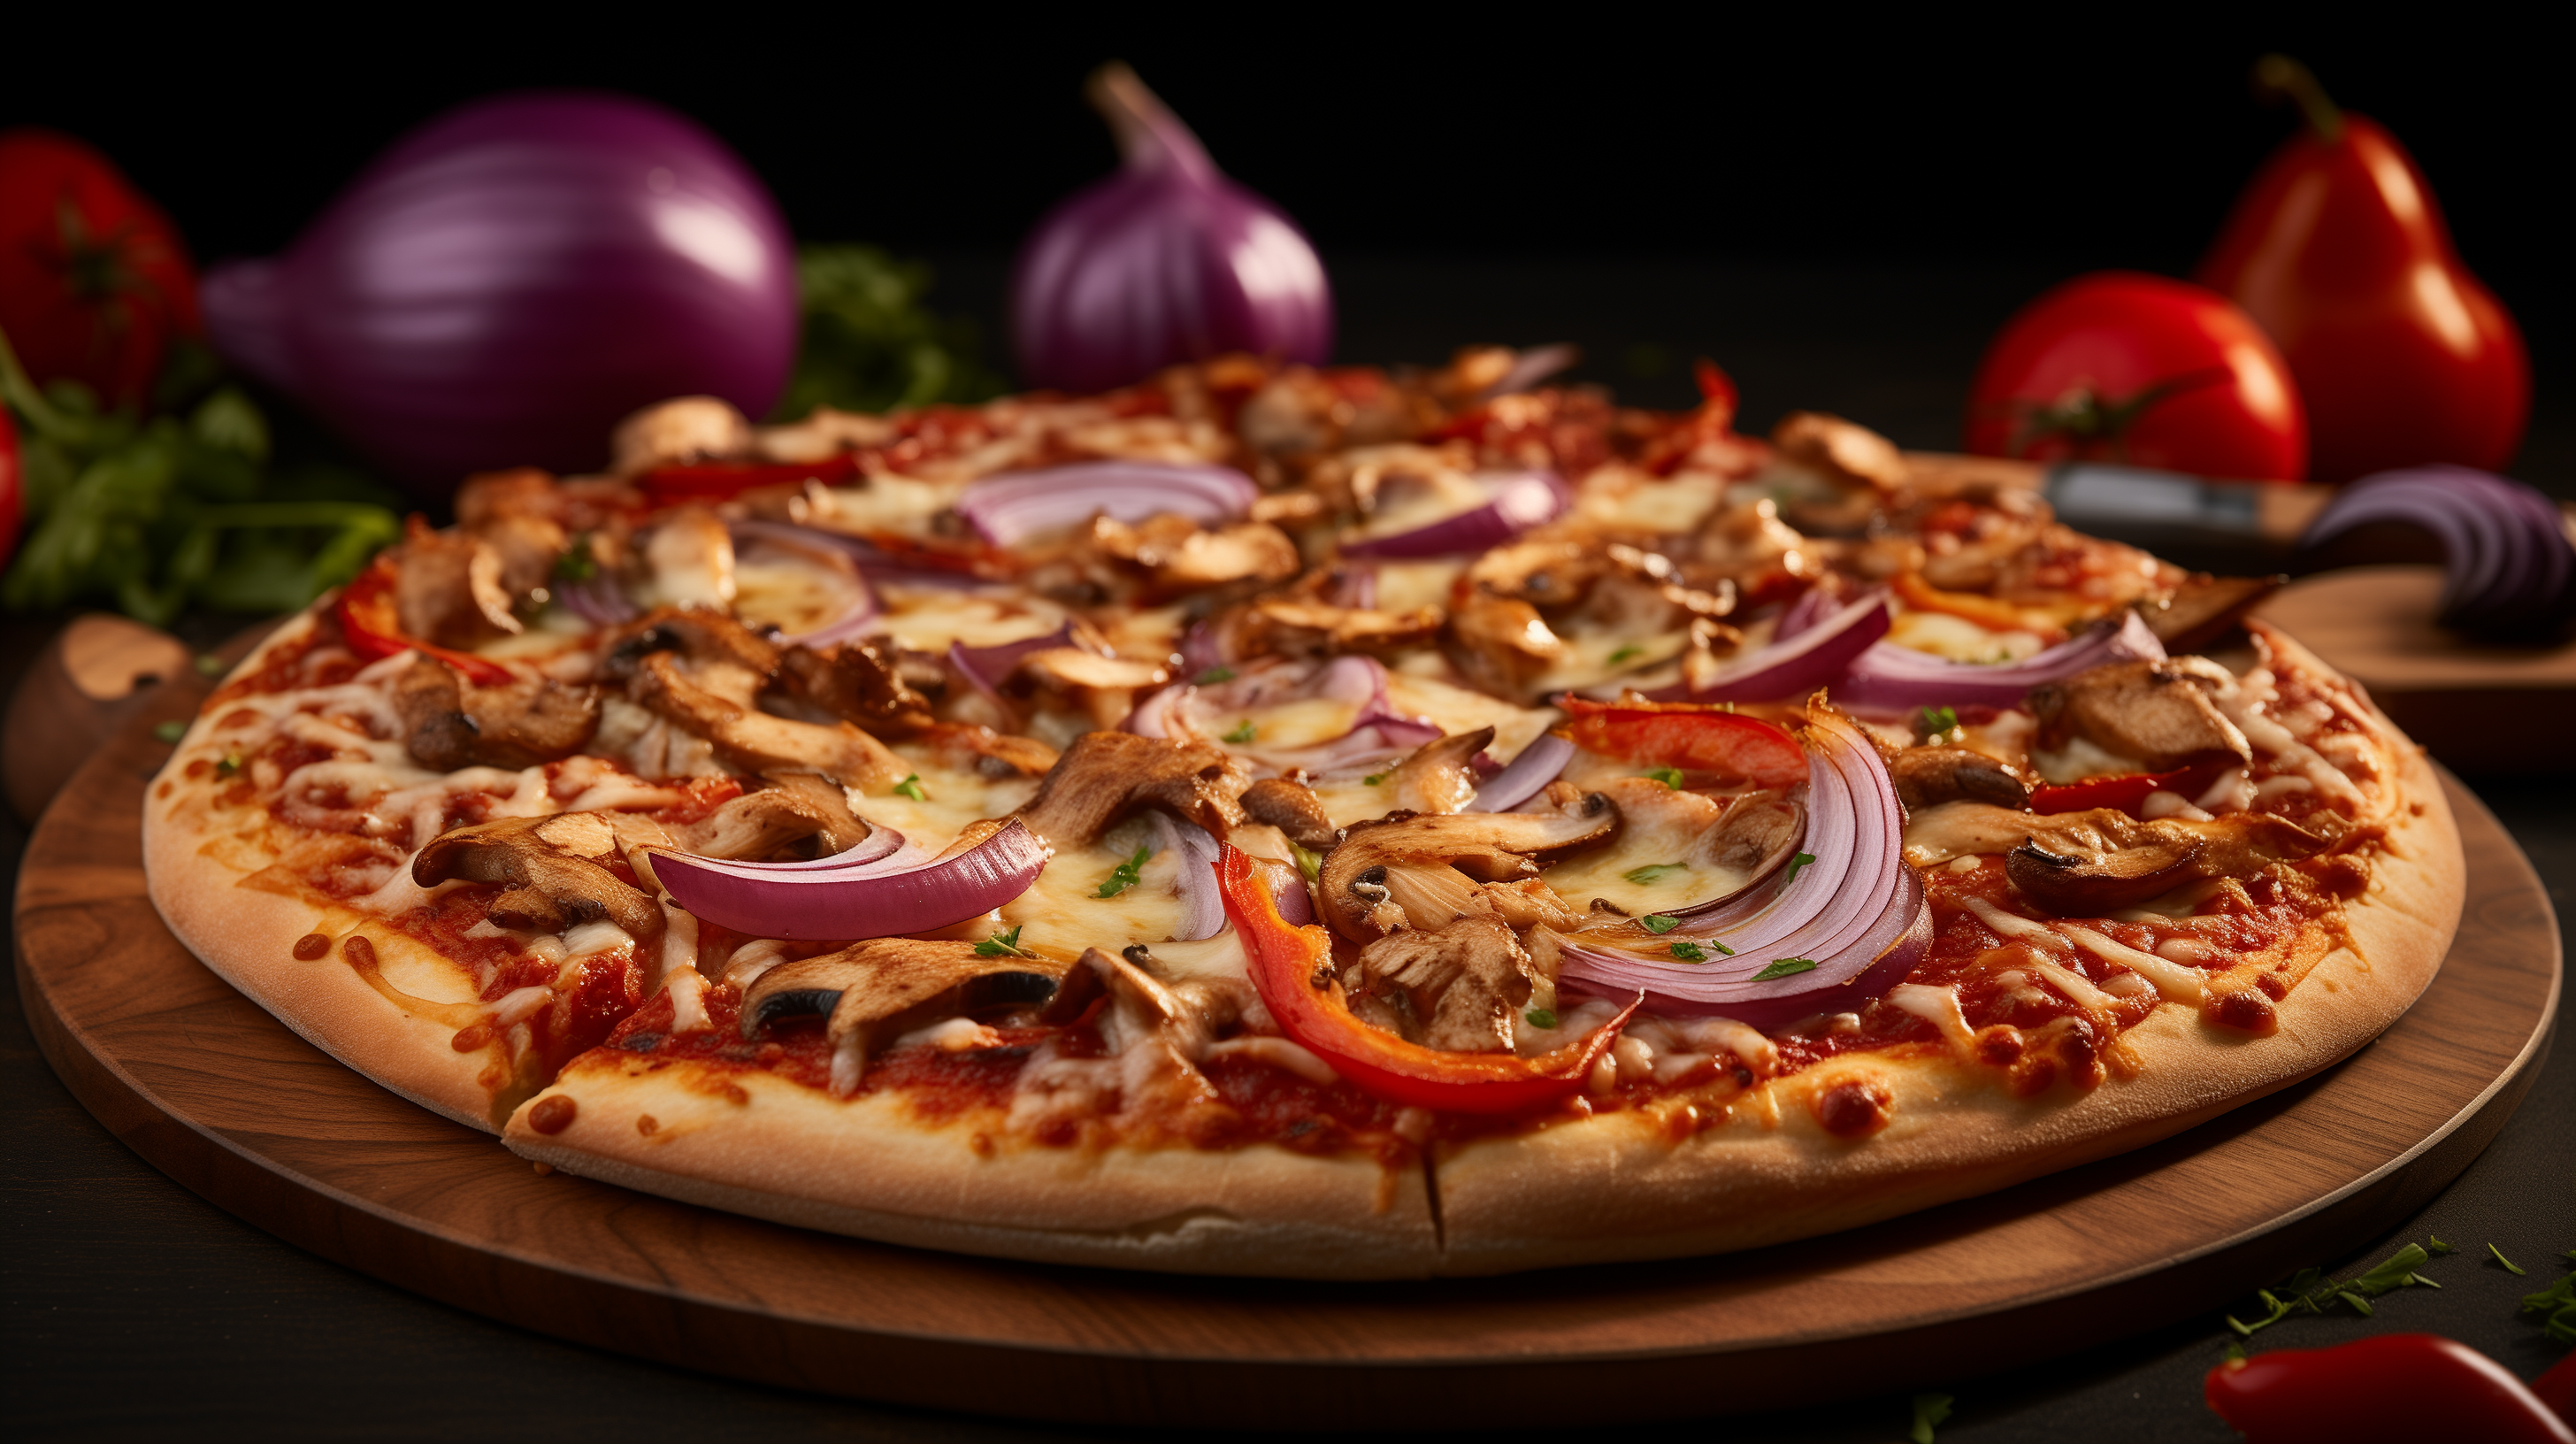 Image of a chicken and mushroom pizza.